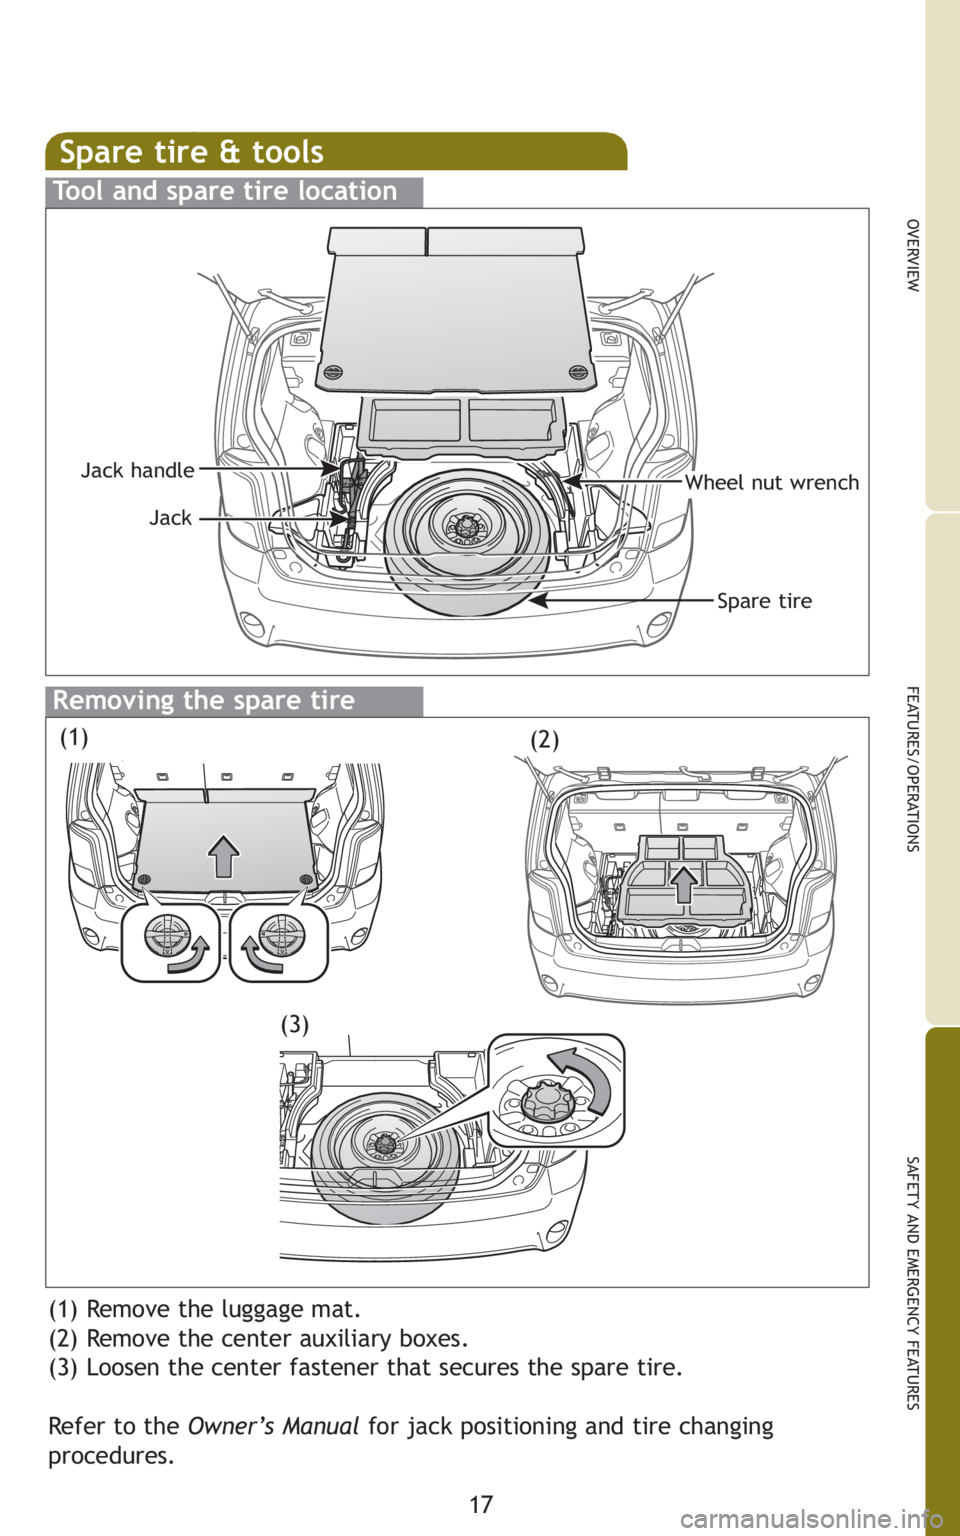 TOYOTA xB 2011   (in English) User Guide 17
OVERVIEW
FEATURES/OPERATIONS
SAFETY AND EMERGENCY FEATURES
Spare tire & tools
Tool and spare tire location
Removing the spare tire
(1) Remove the luggage mat.
(2) Remove the center auxiliary boxes.